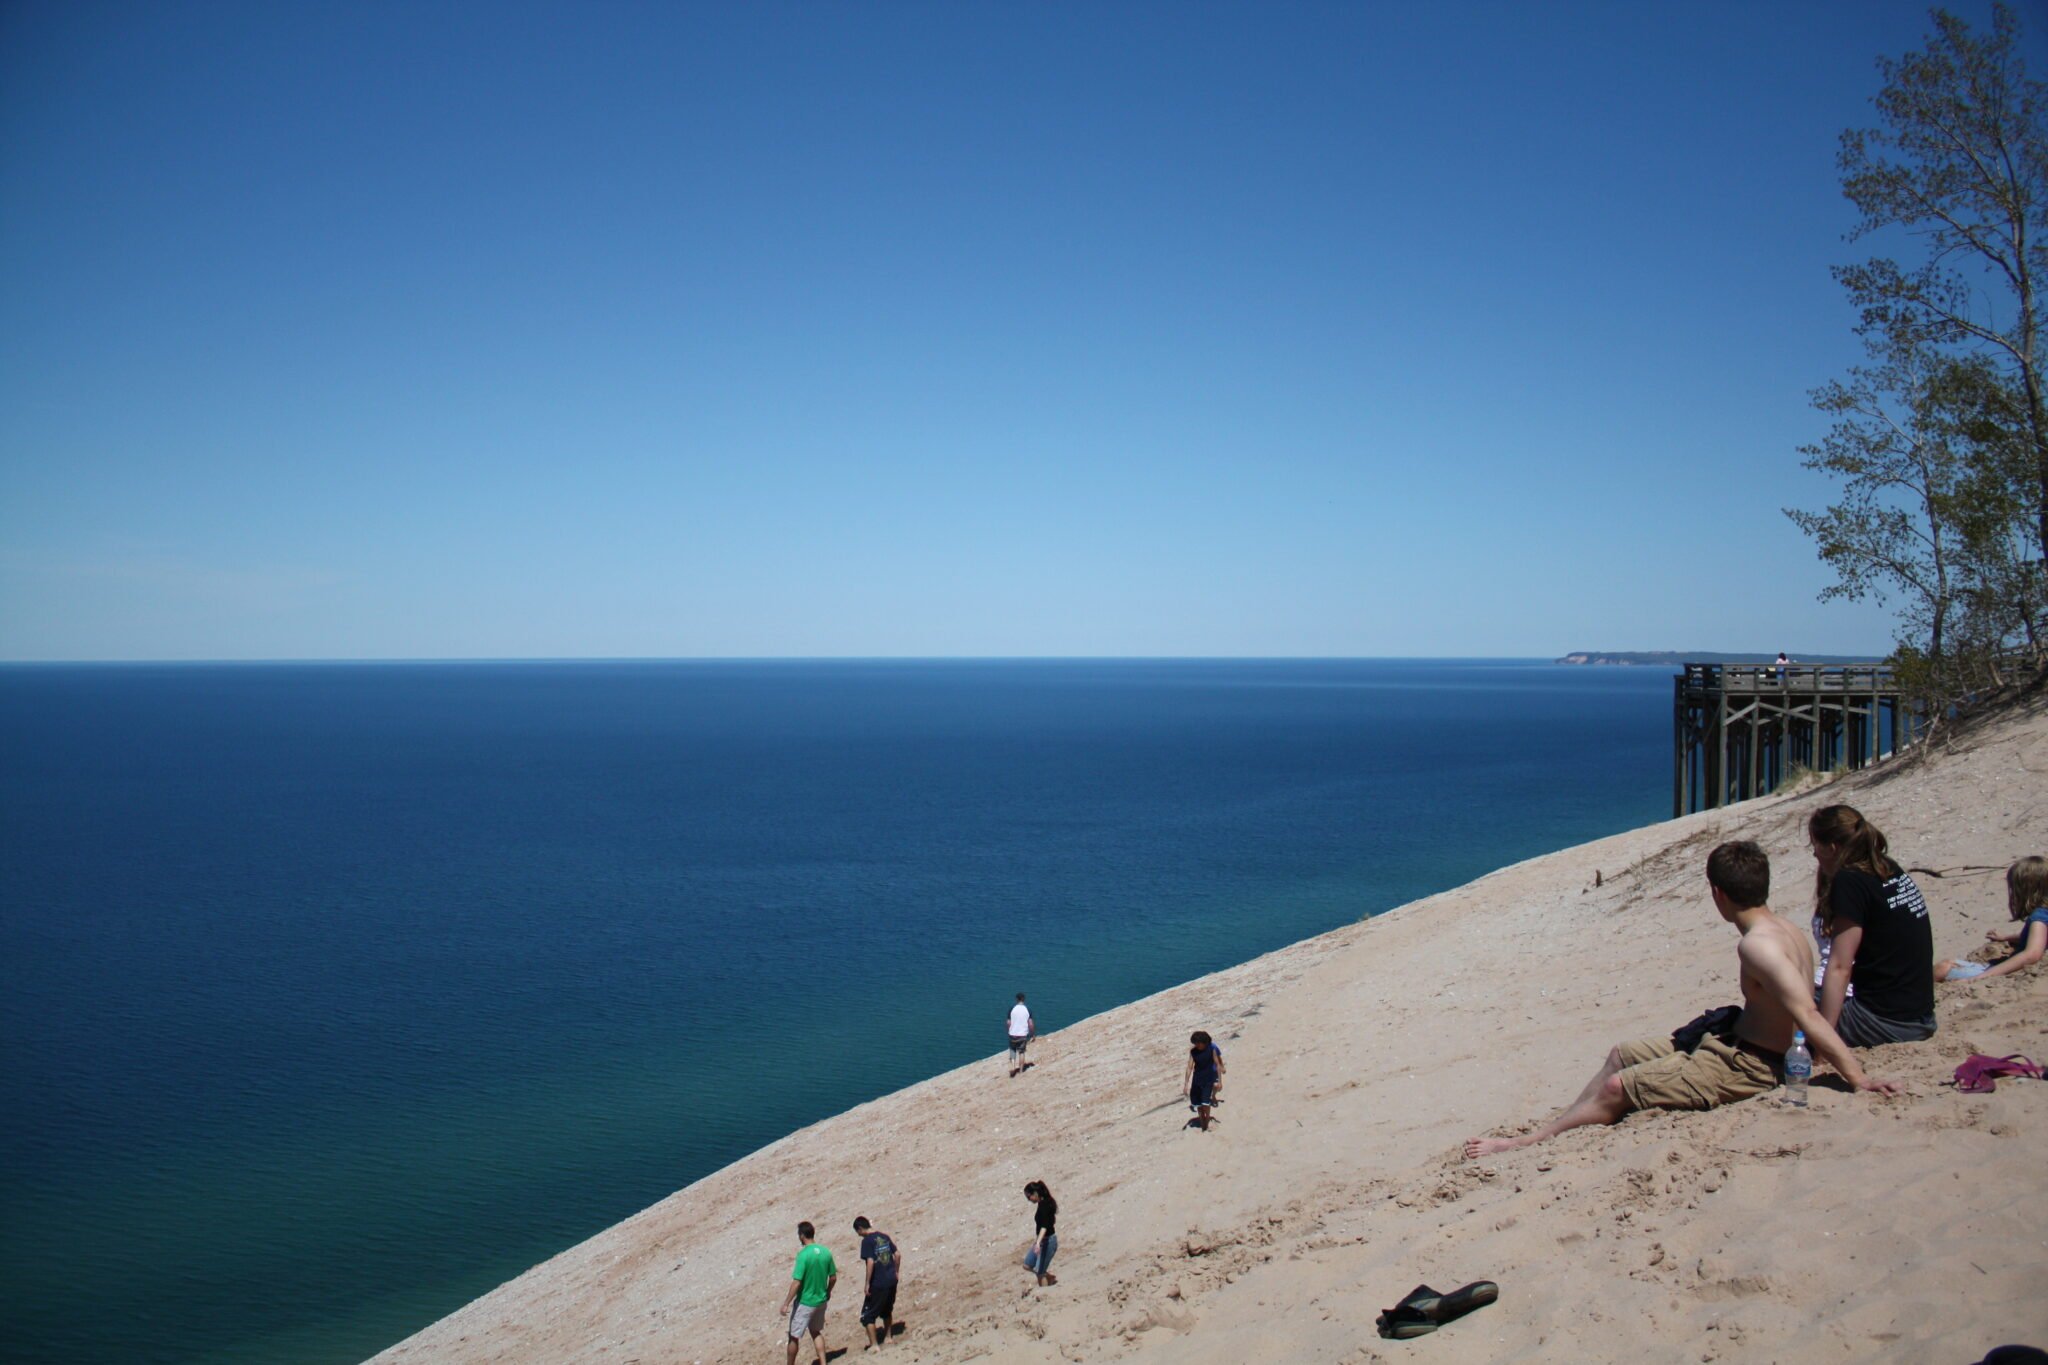 dune overlook in the Sleeping Bear Dunes National Lakeshore - one of the best RV trip ideas